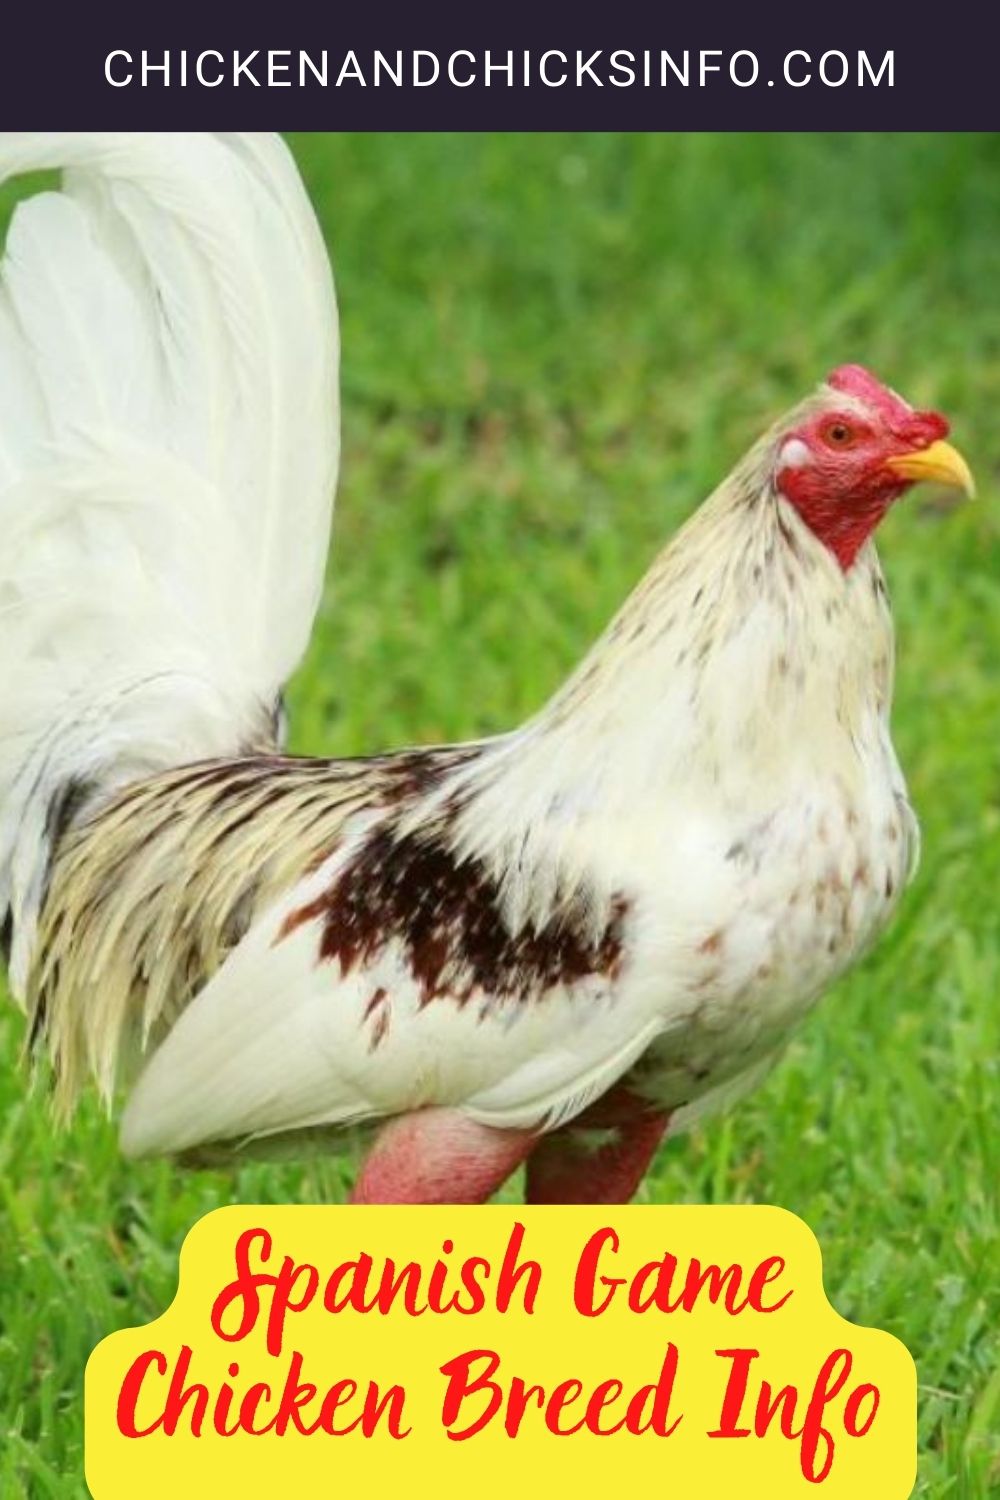 A white Spanish Game rooster standing on green grass. pitnerest image.